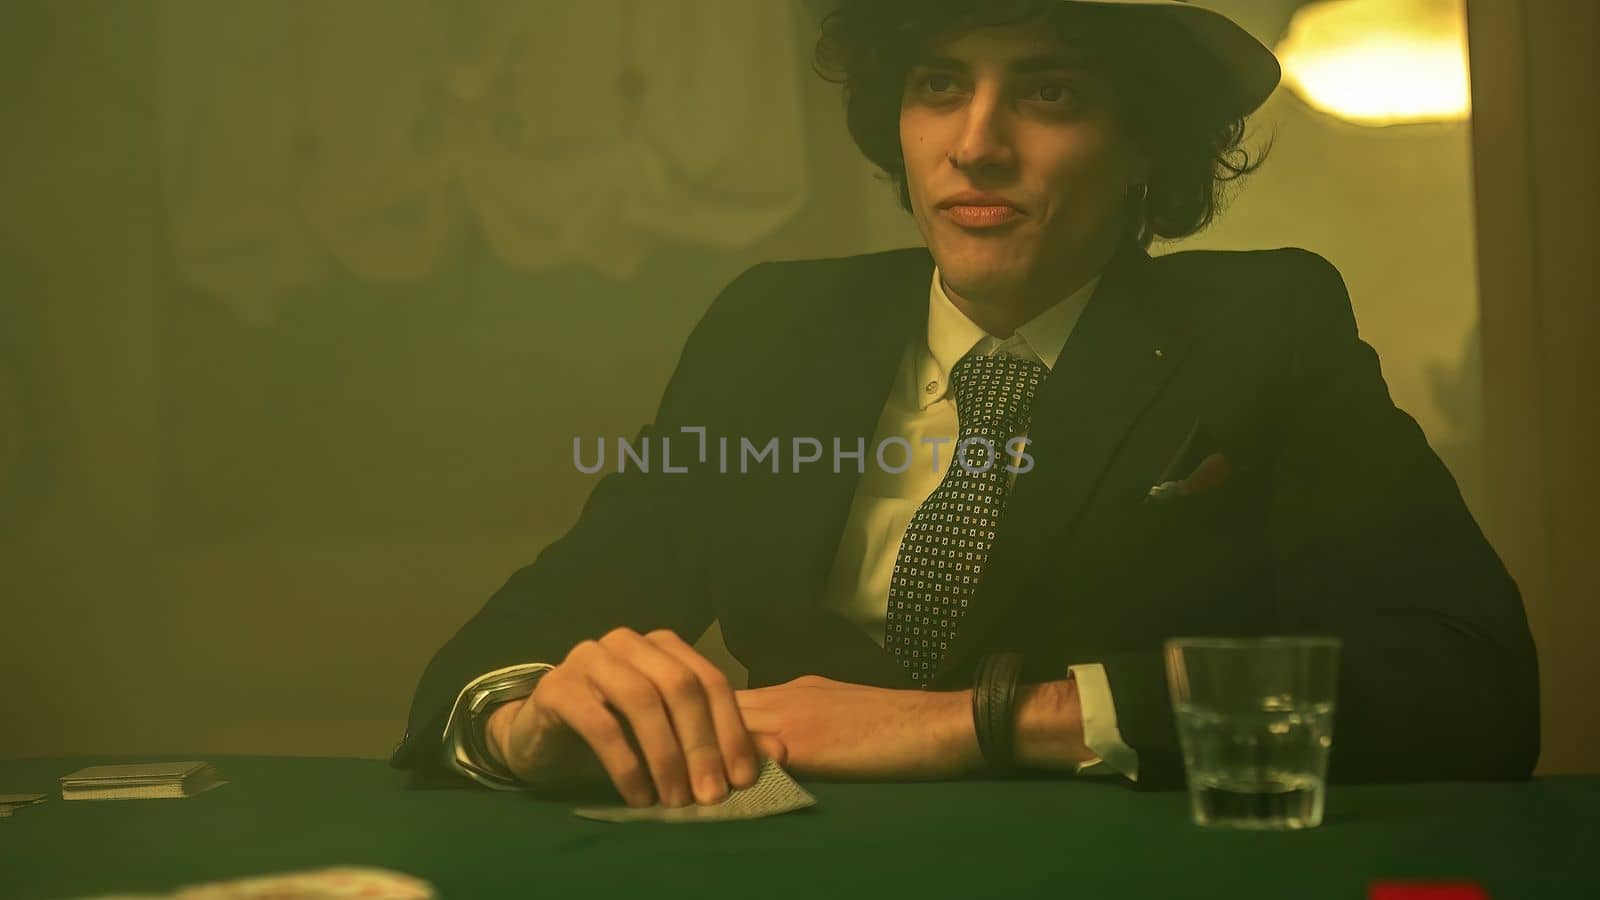 Poker players disappointed look as he drops the cards on the table during a game by pippocarlot